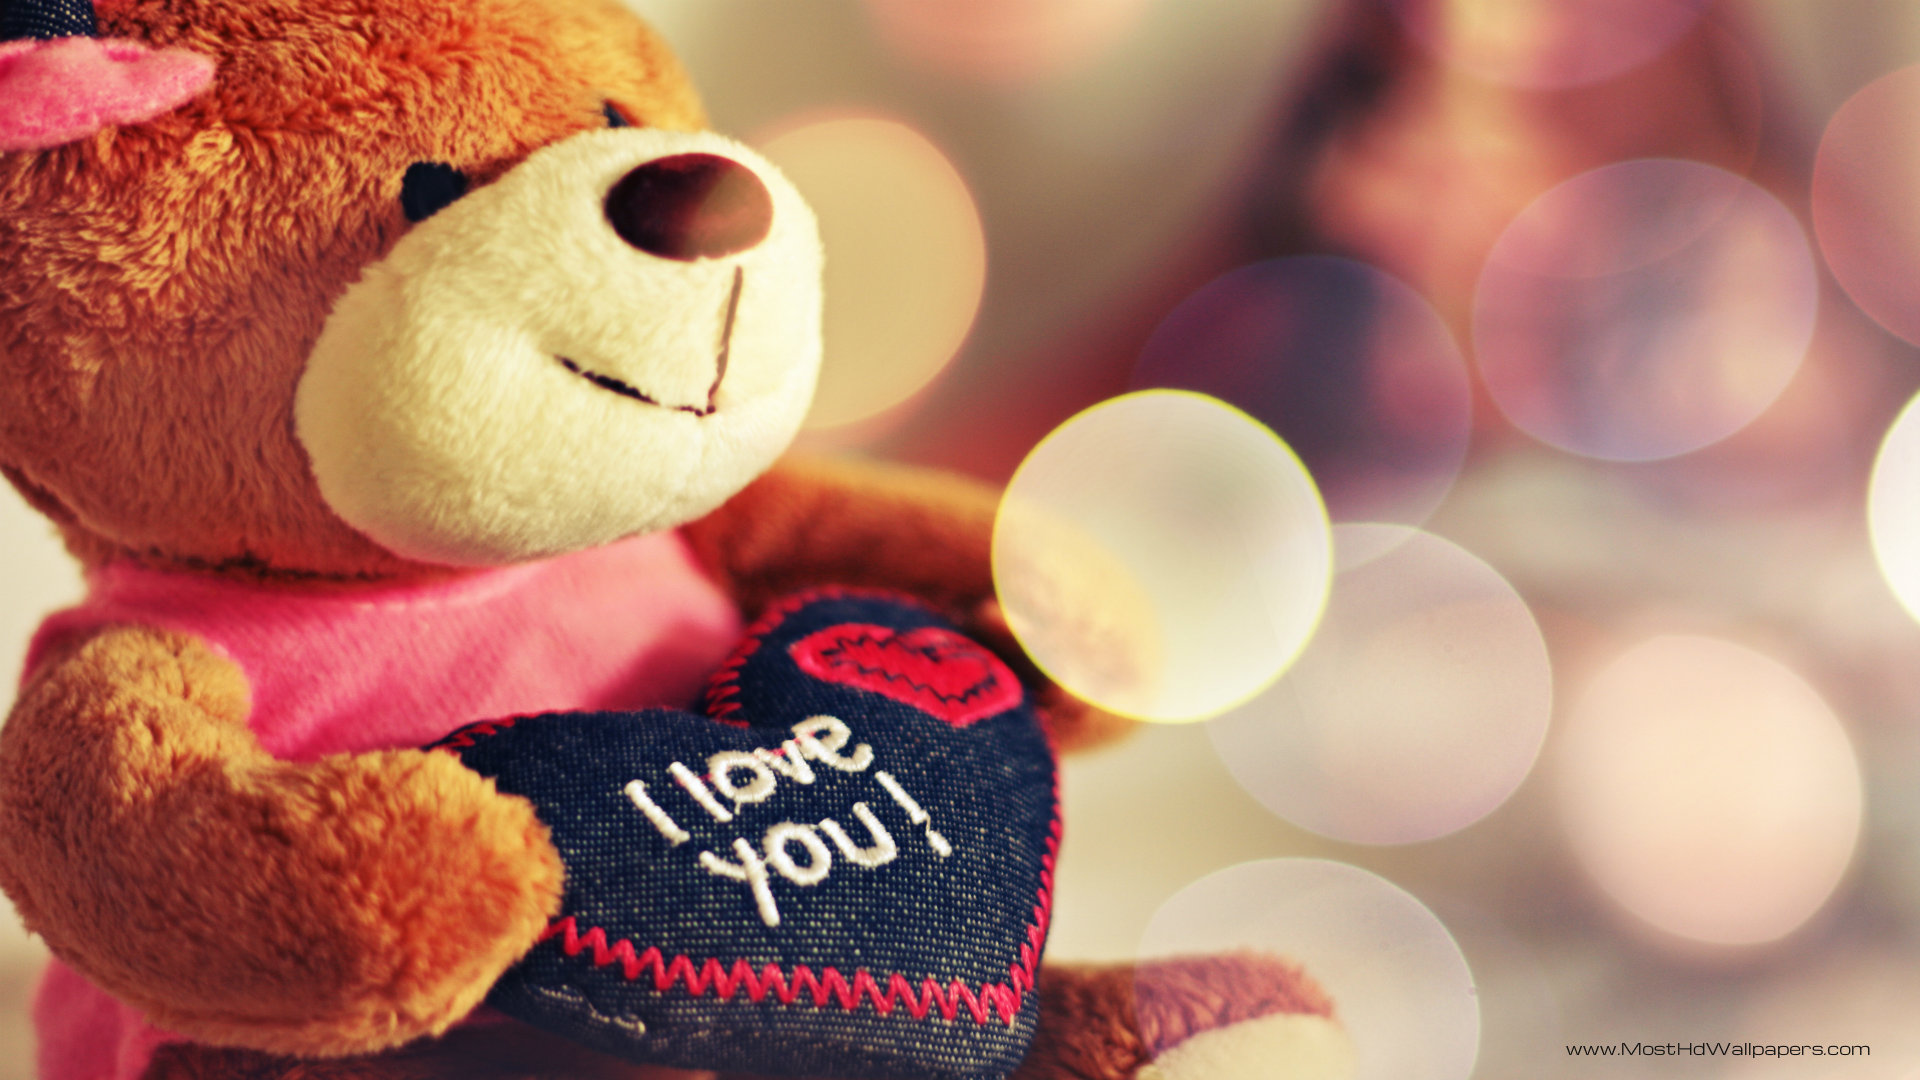 I Love You Widescreen Most HD Wallpapers Pictures Desktop